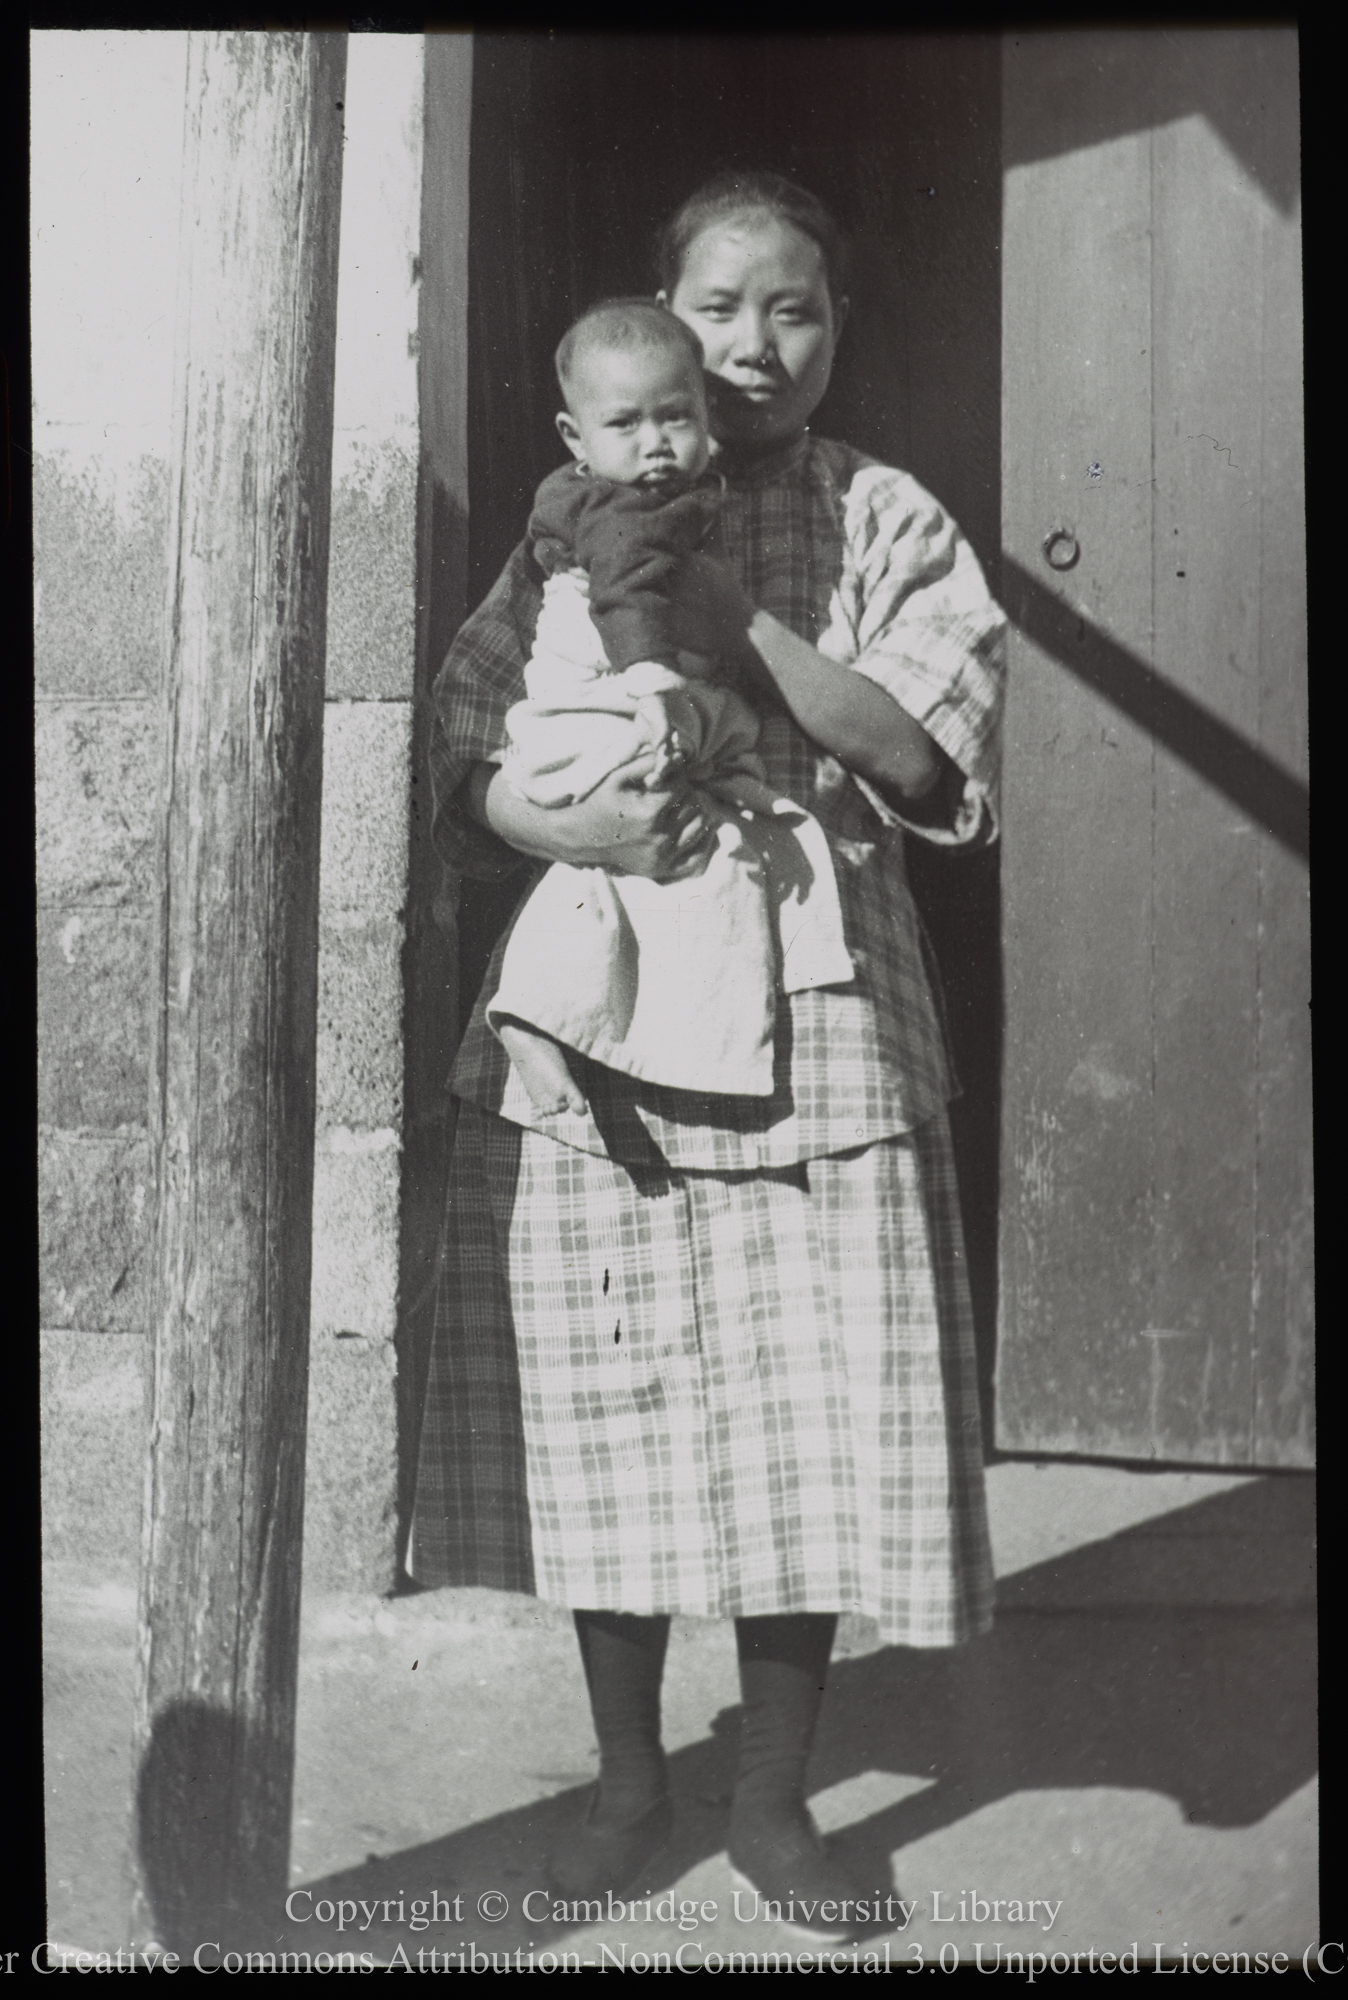 Chinese woman and baby, 1900 - 1920